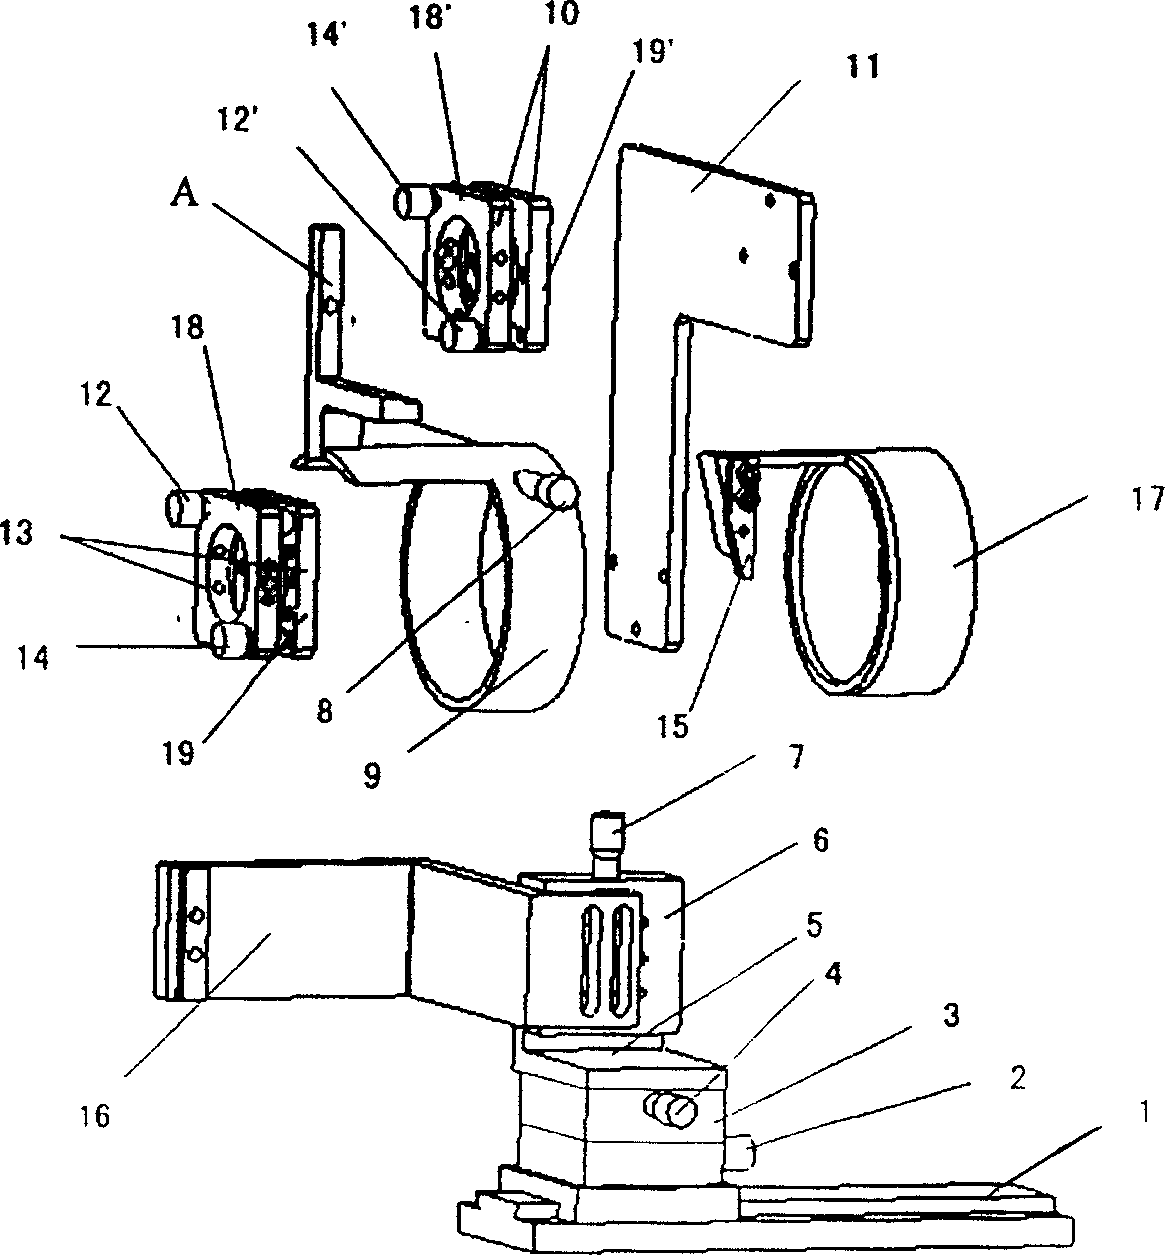 Array aiming adjusting device of fiber-optic collimating apparatus